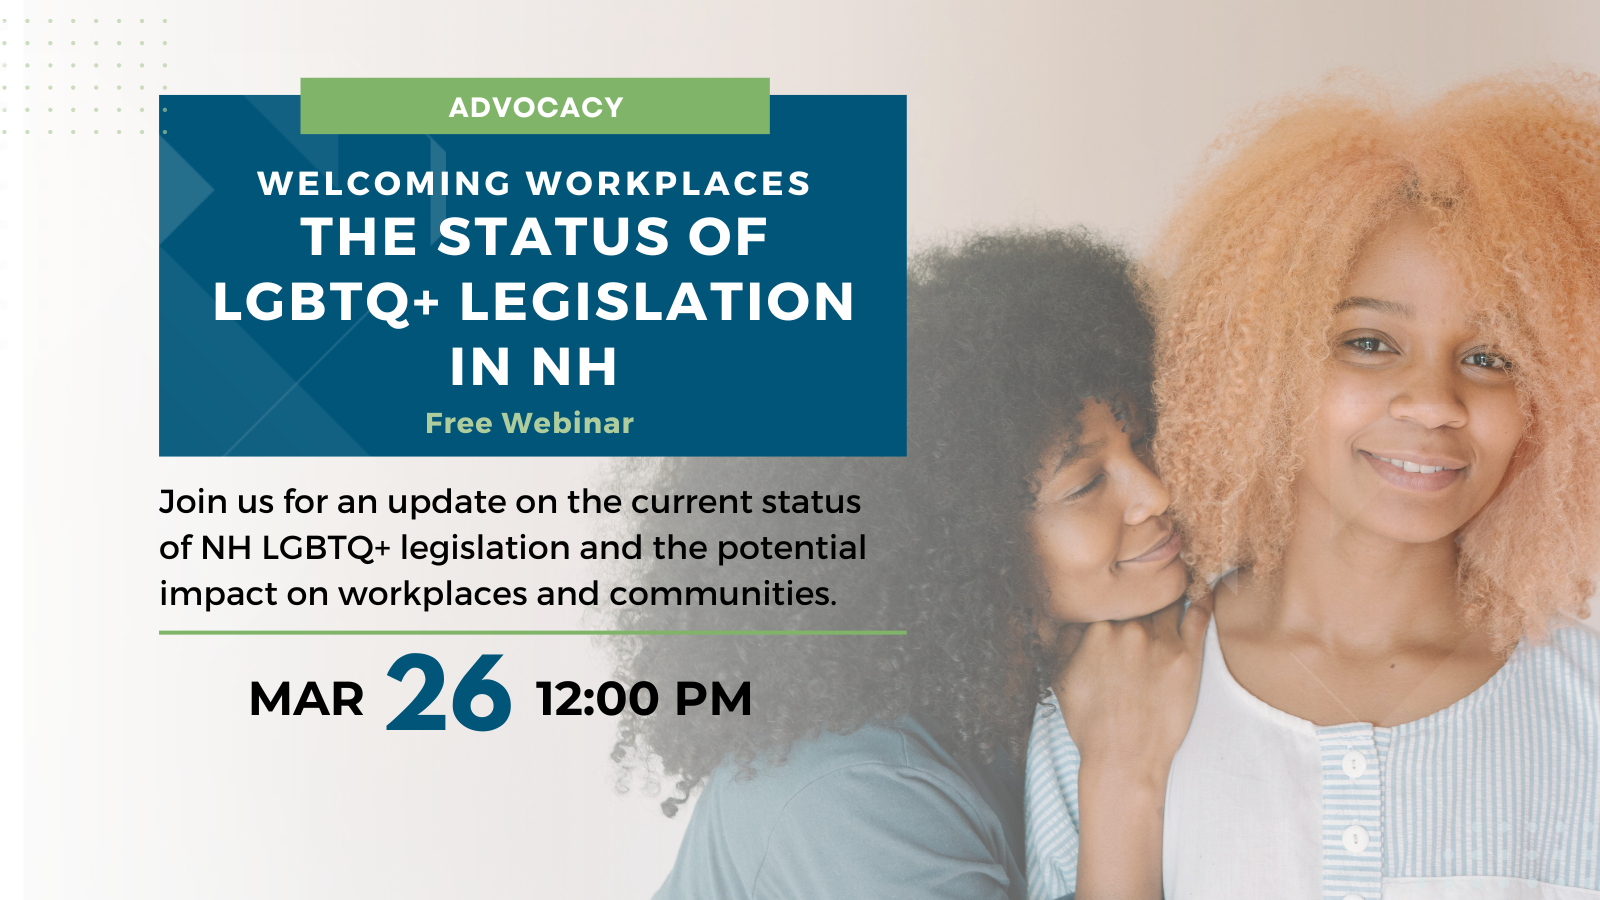 Join us for an update on the current status of NH LGBTQ+ legislation and the impact it can have on our workplaces and communities. Led by Linds Jakows (they/them), Co-founder of 603 Equality and a representative of GLAD.